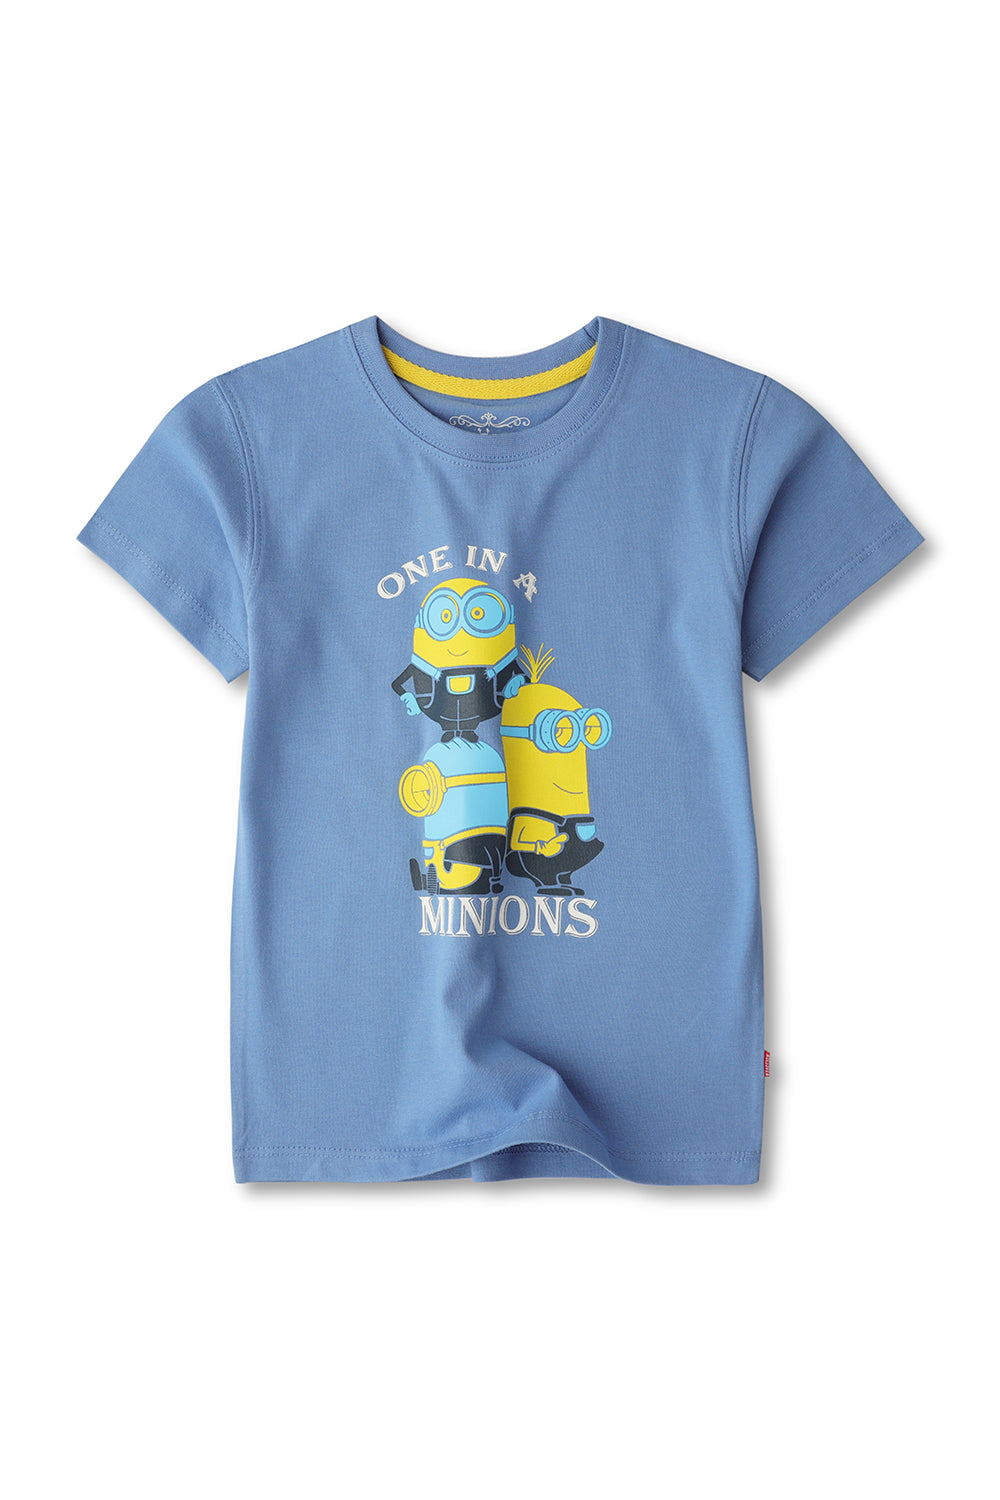 One in a Minions Boys Tee